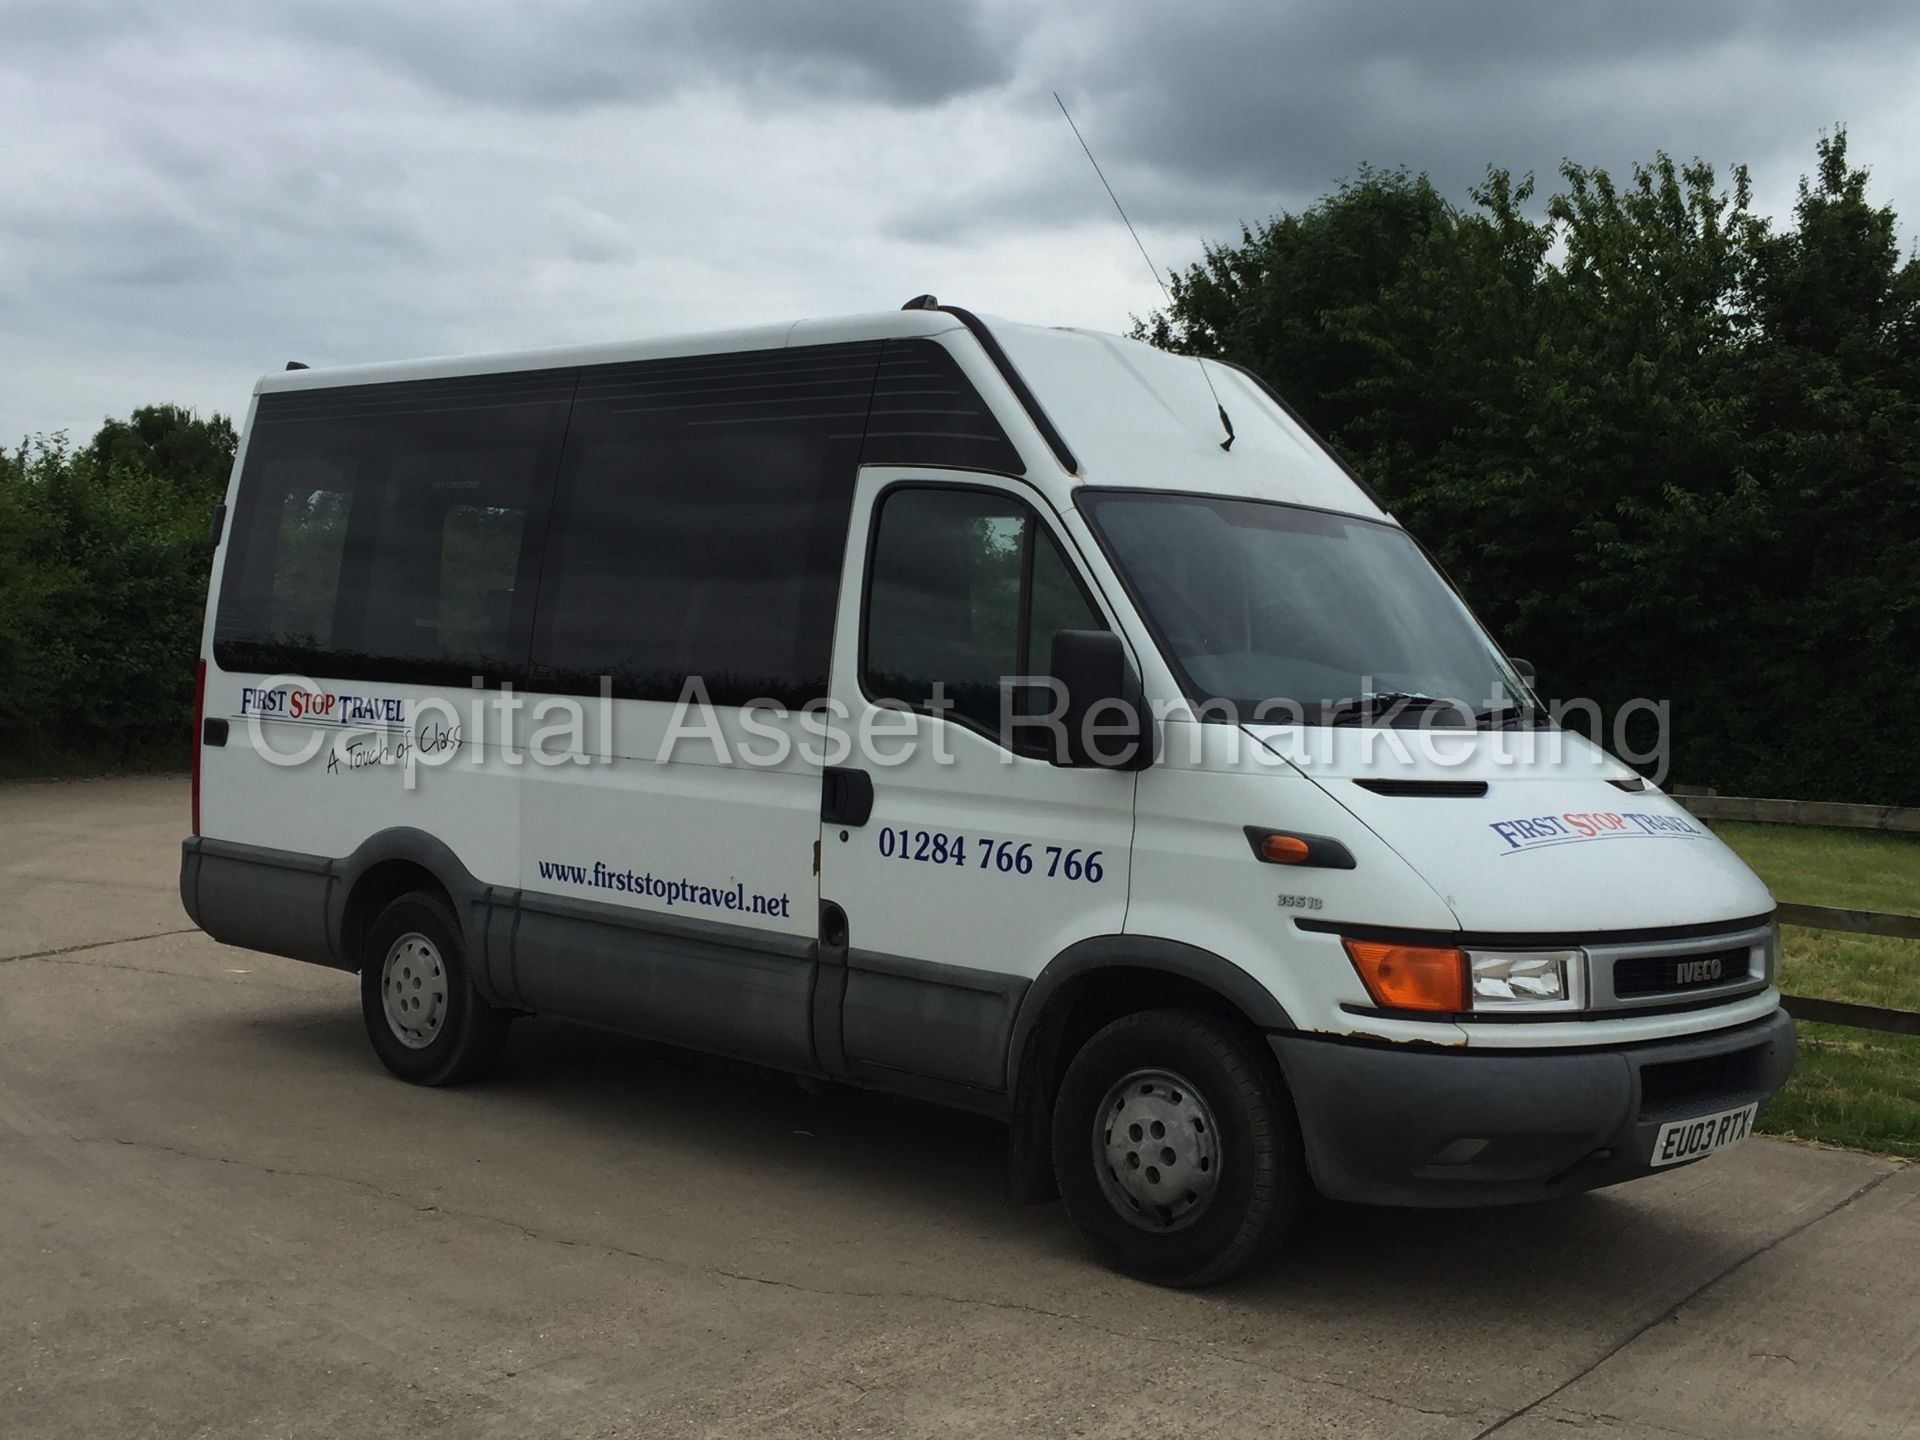 (on sale) IVECO DAILY 35S13 '14 SEATER MINI-BUS' (2003 - 03 REG) '2.3 DIESEL - 6 SPEED' (NO VAT) - Image 8 of 23